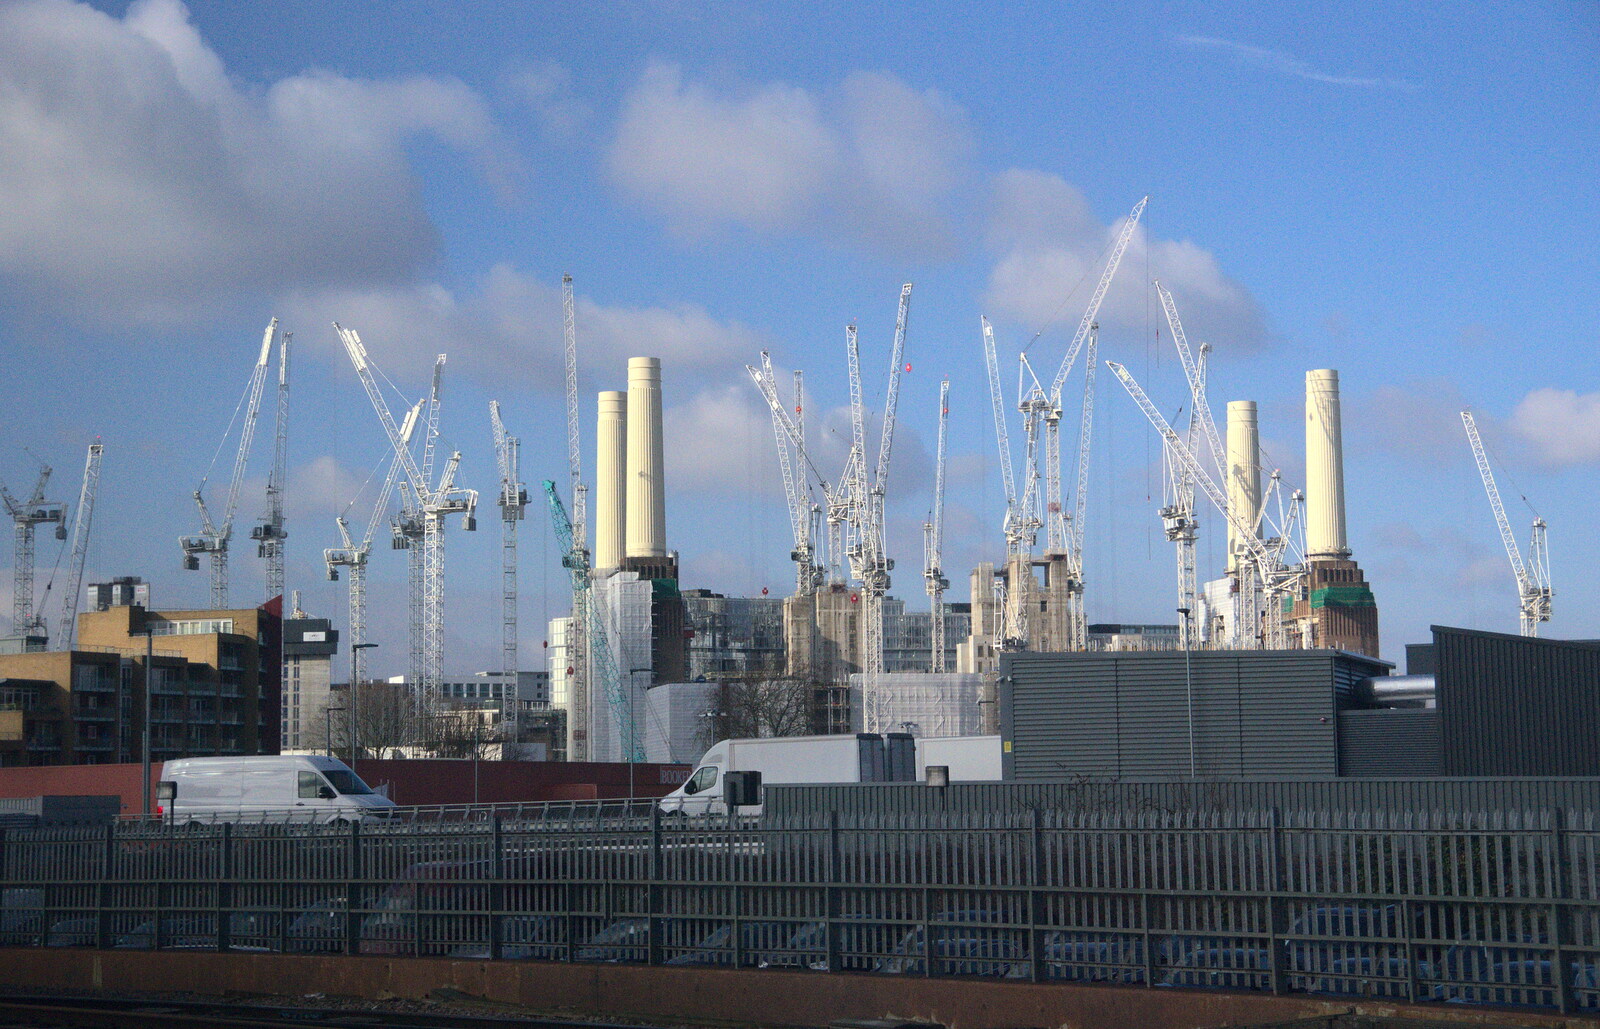 Battersea Power station is a forest of cranes from A Wintry Trip Down South, Walkford, Dorset - 1st February 2019